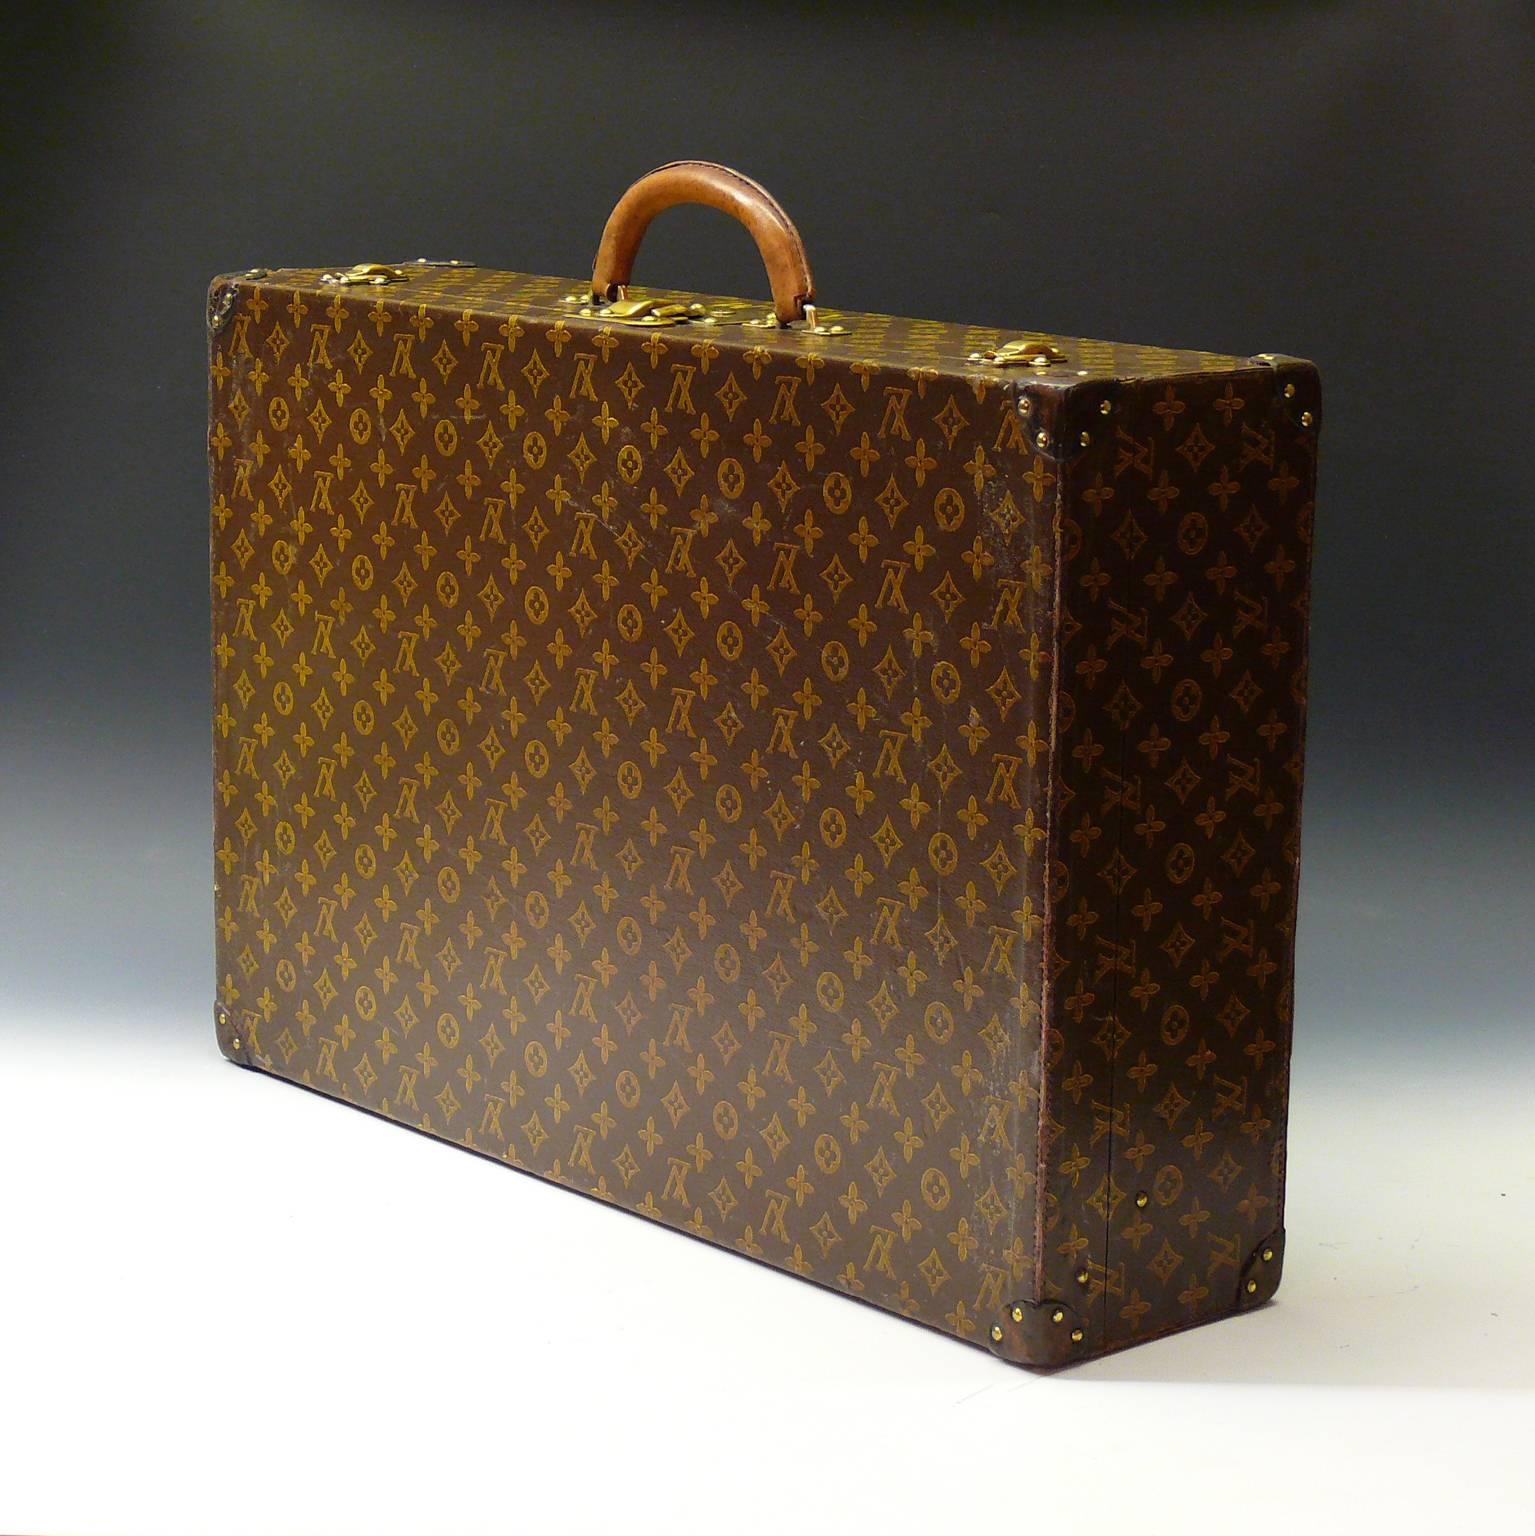 An unusual and lightweight vintage Louis Vuitton suitcase in LV monogram with leather corners and original interior, circa 1945.

Louis Vuitton was founded by its namesake in 1854, with the first shop on Rue Neuve des Capucines in Paris, France.